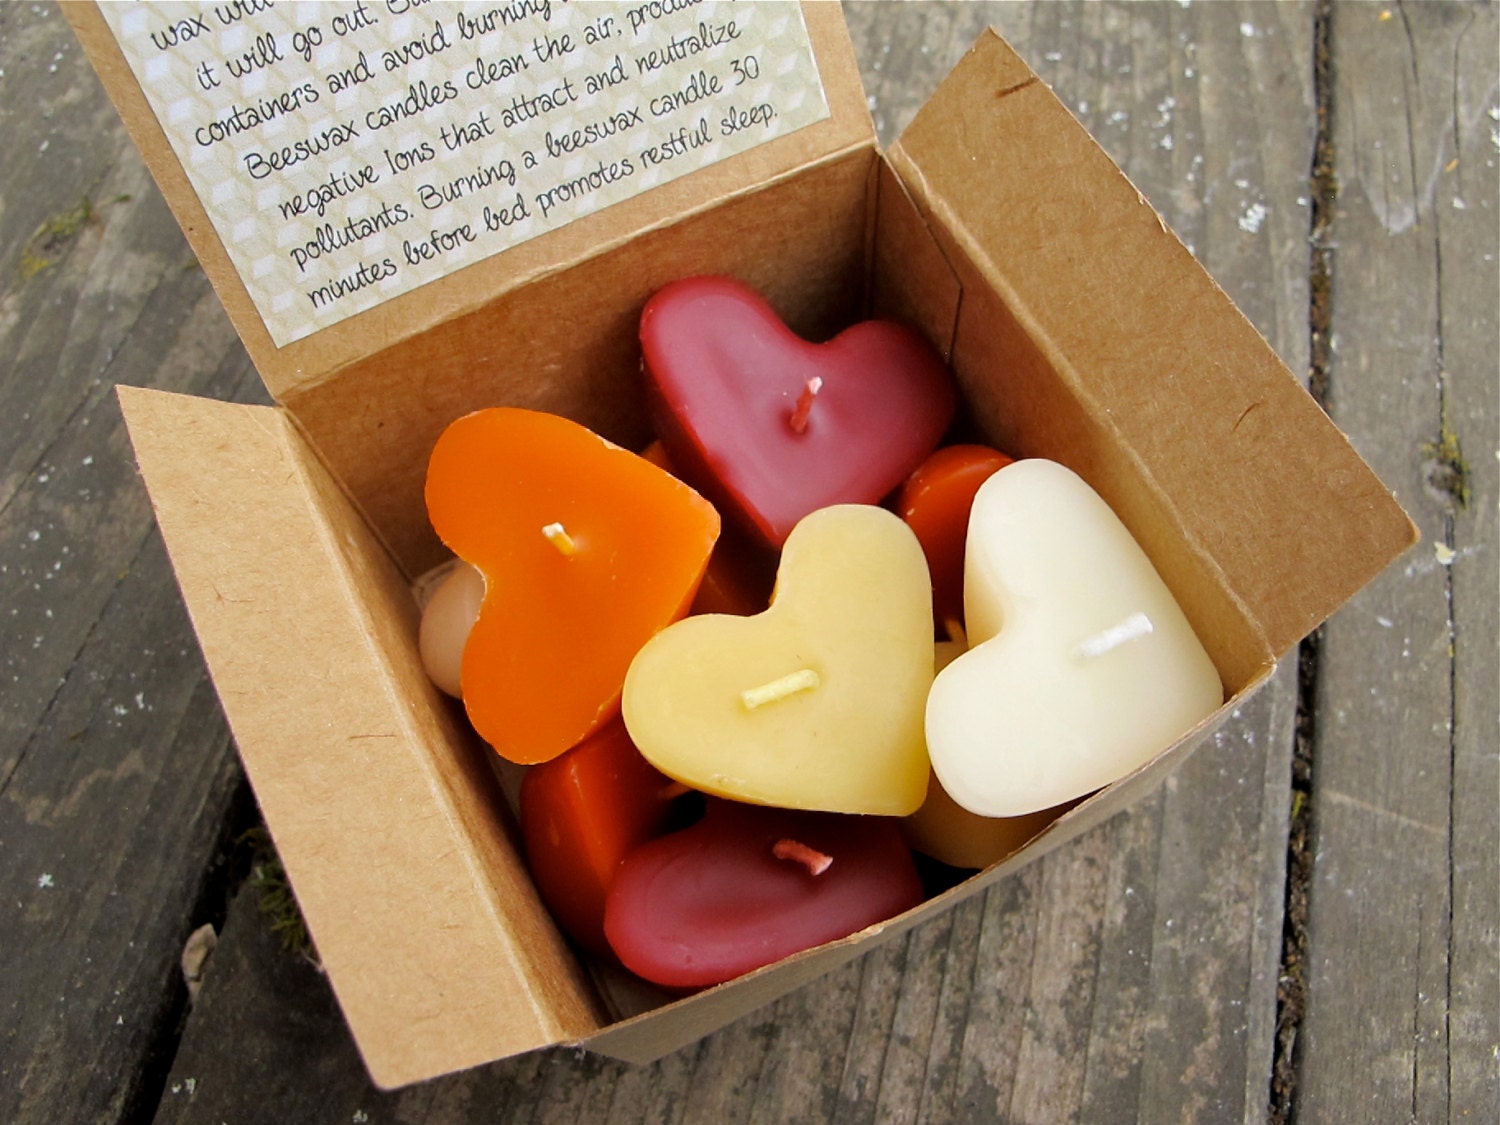 100% pure beeswax heart shaped candle-large 4 heart candle-unique heart  beeswax candles-organic beeswax